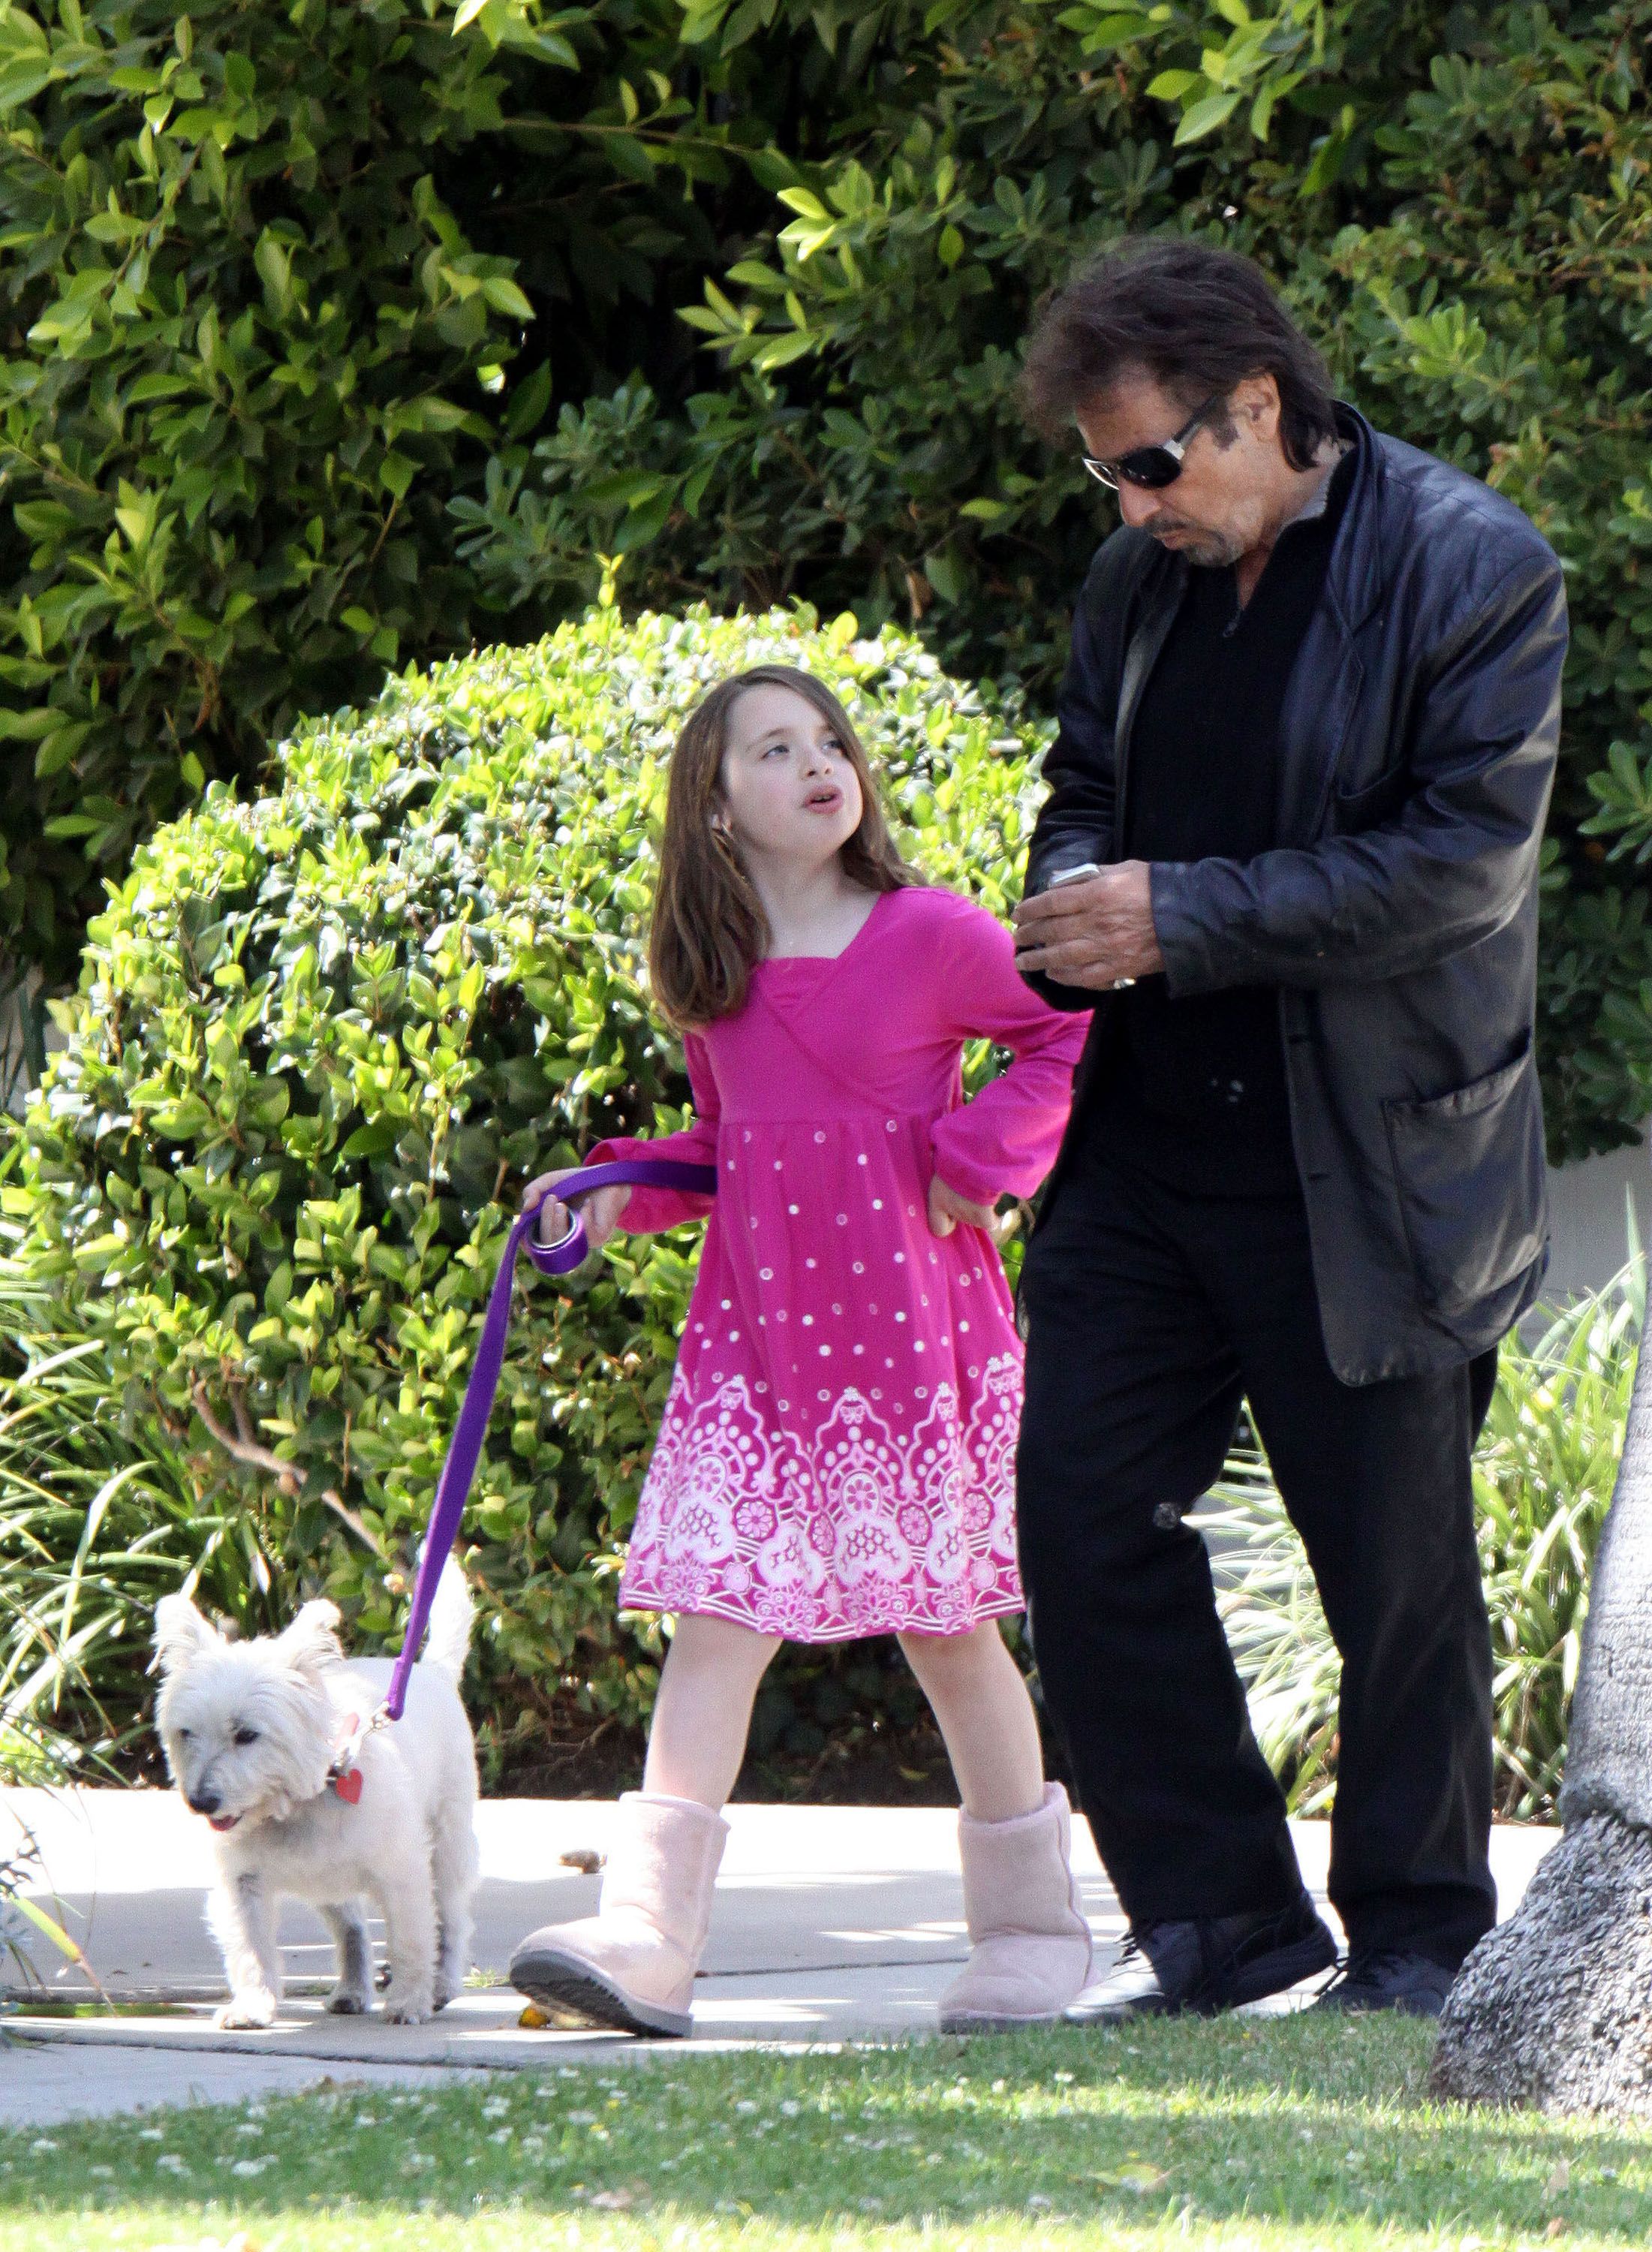 Al Pacino and his daughter walking a dog | Source: Getty Images